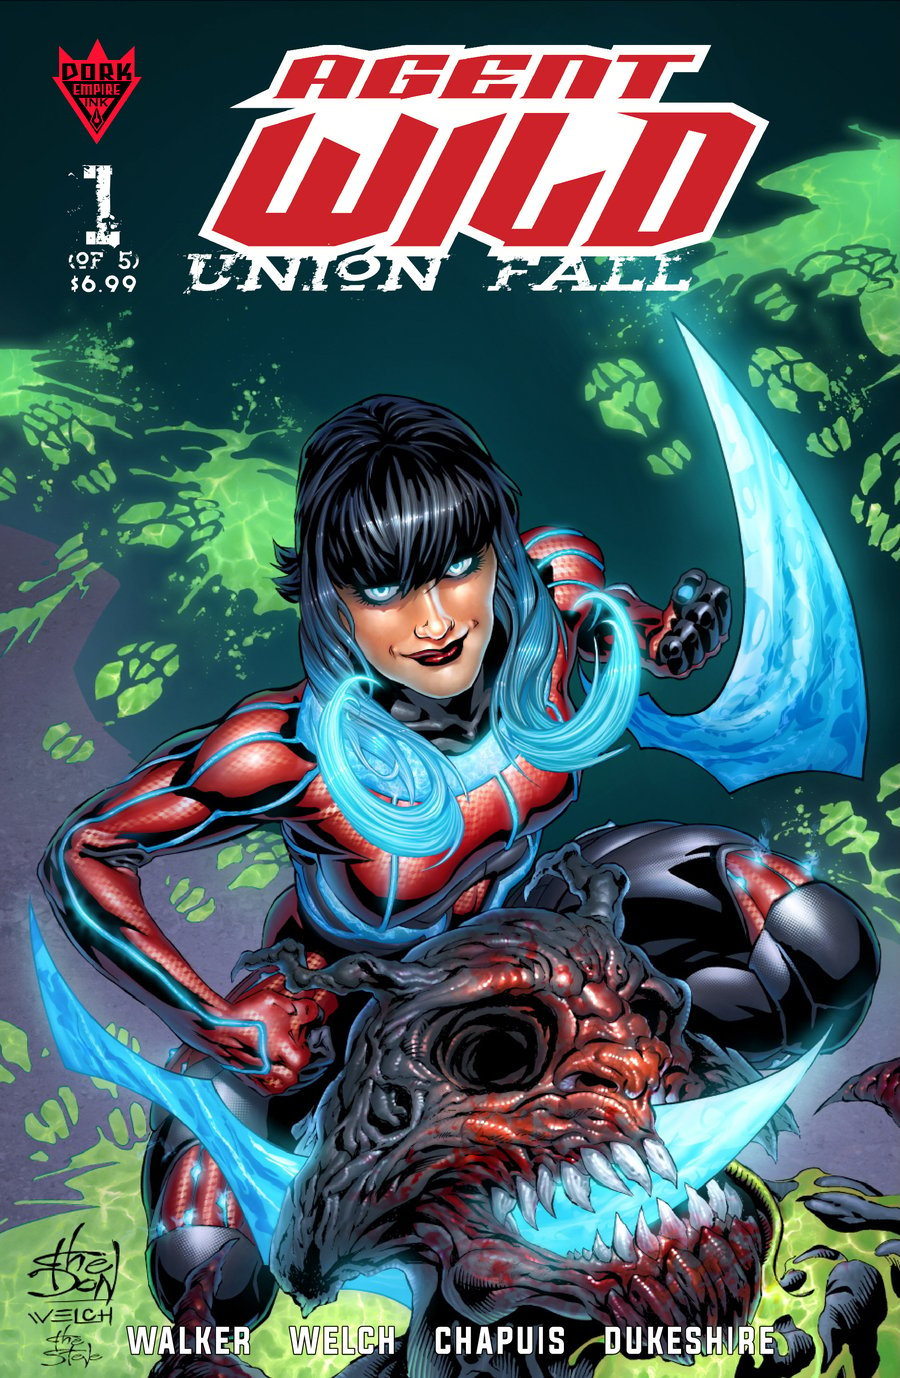 Image of AGENT WILD: Union Fall #1 (of 5) CVR (A) by Don Walker